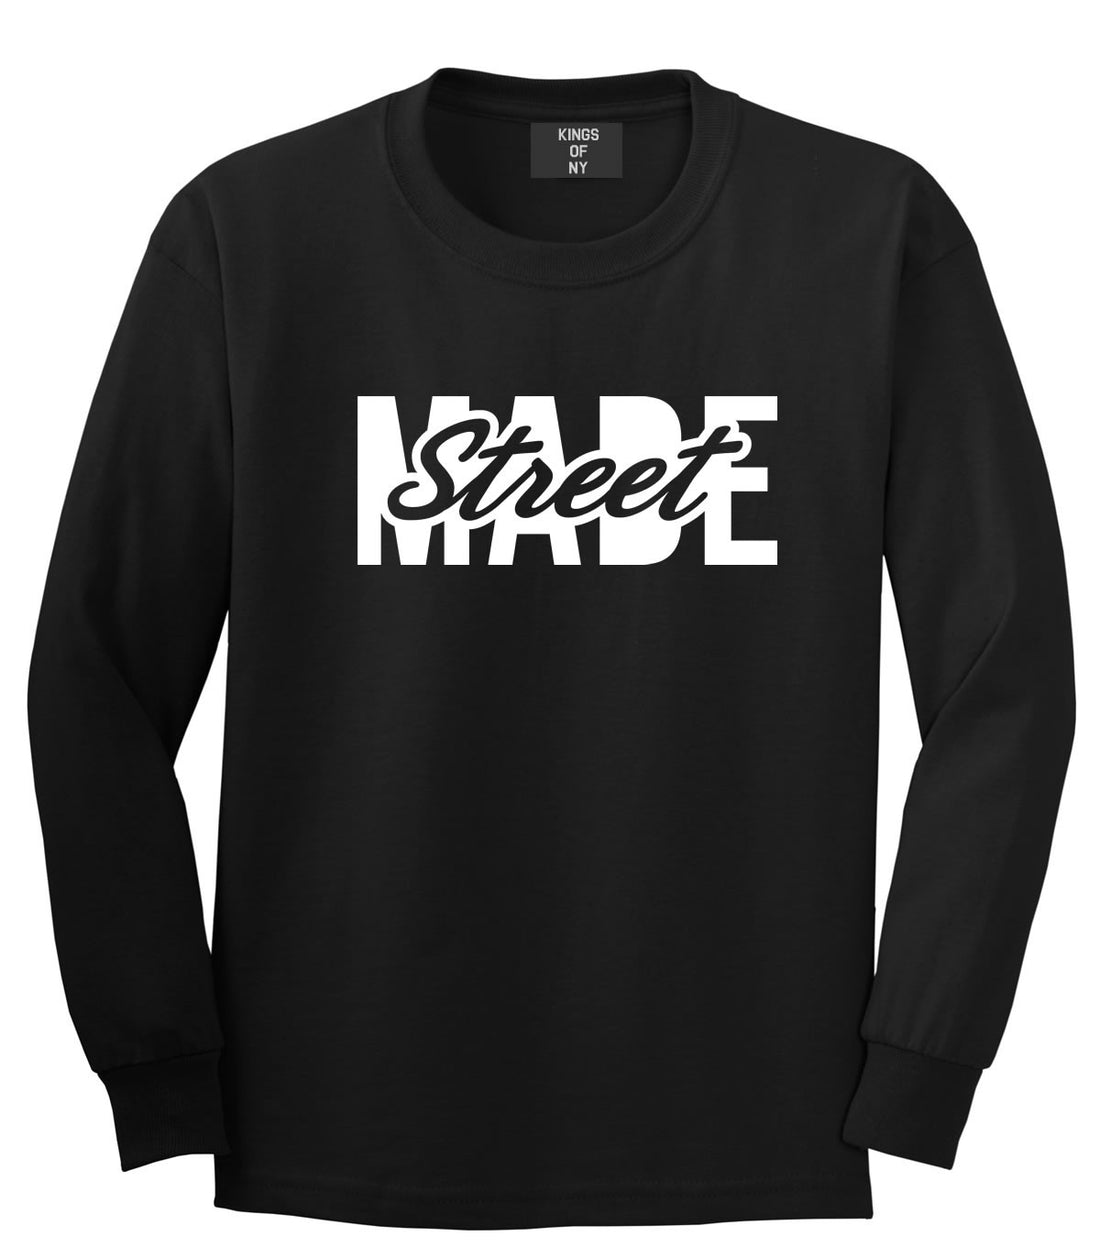 Kings Of NY Street Made Long Sleeve T-Shirt in Black